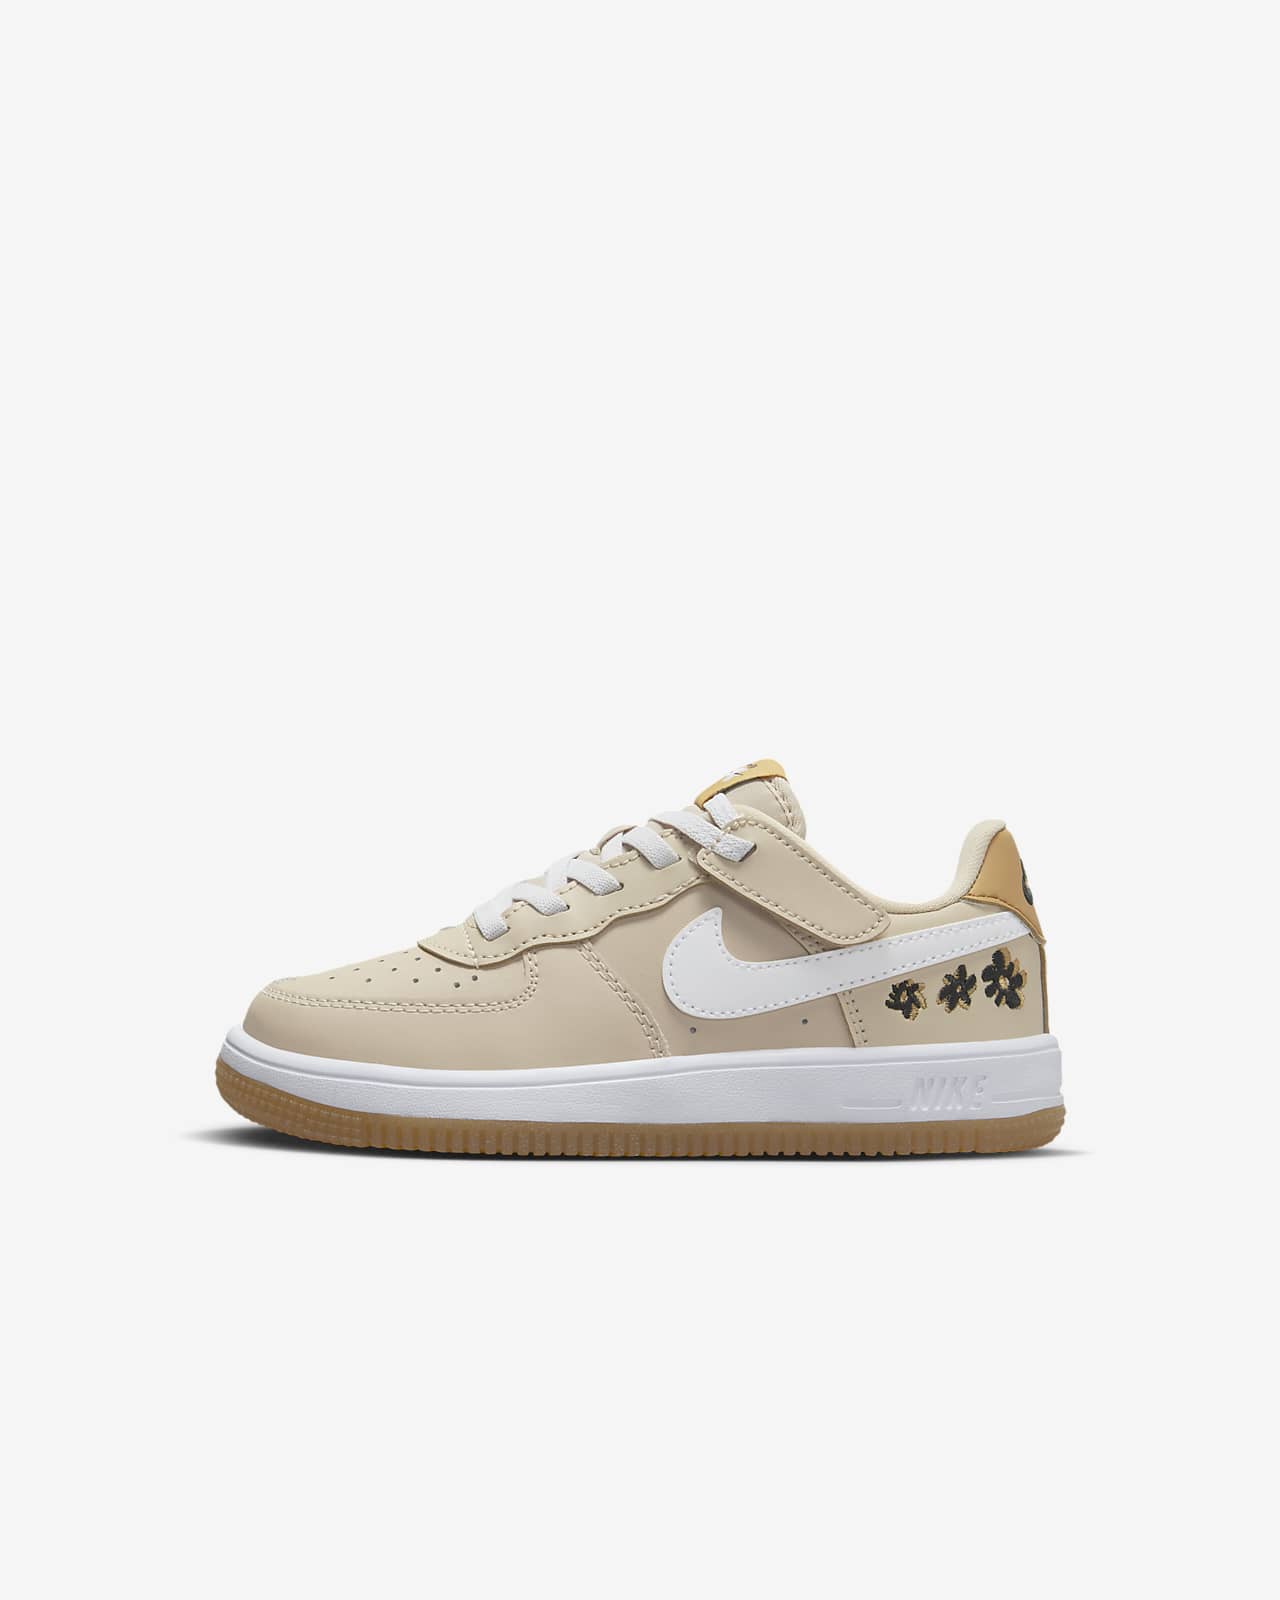 Nike Air Force 1 Low '07 SE Love for All (Women's)